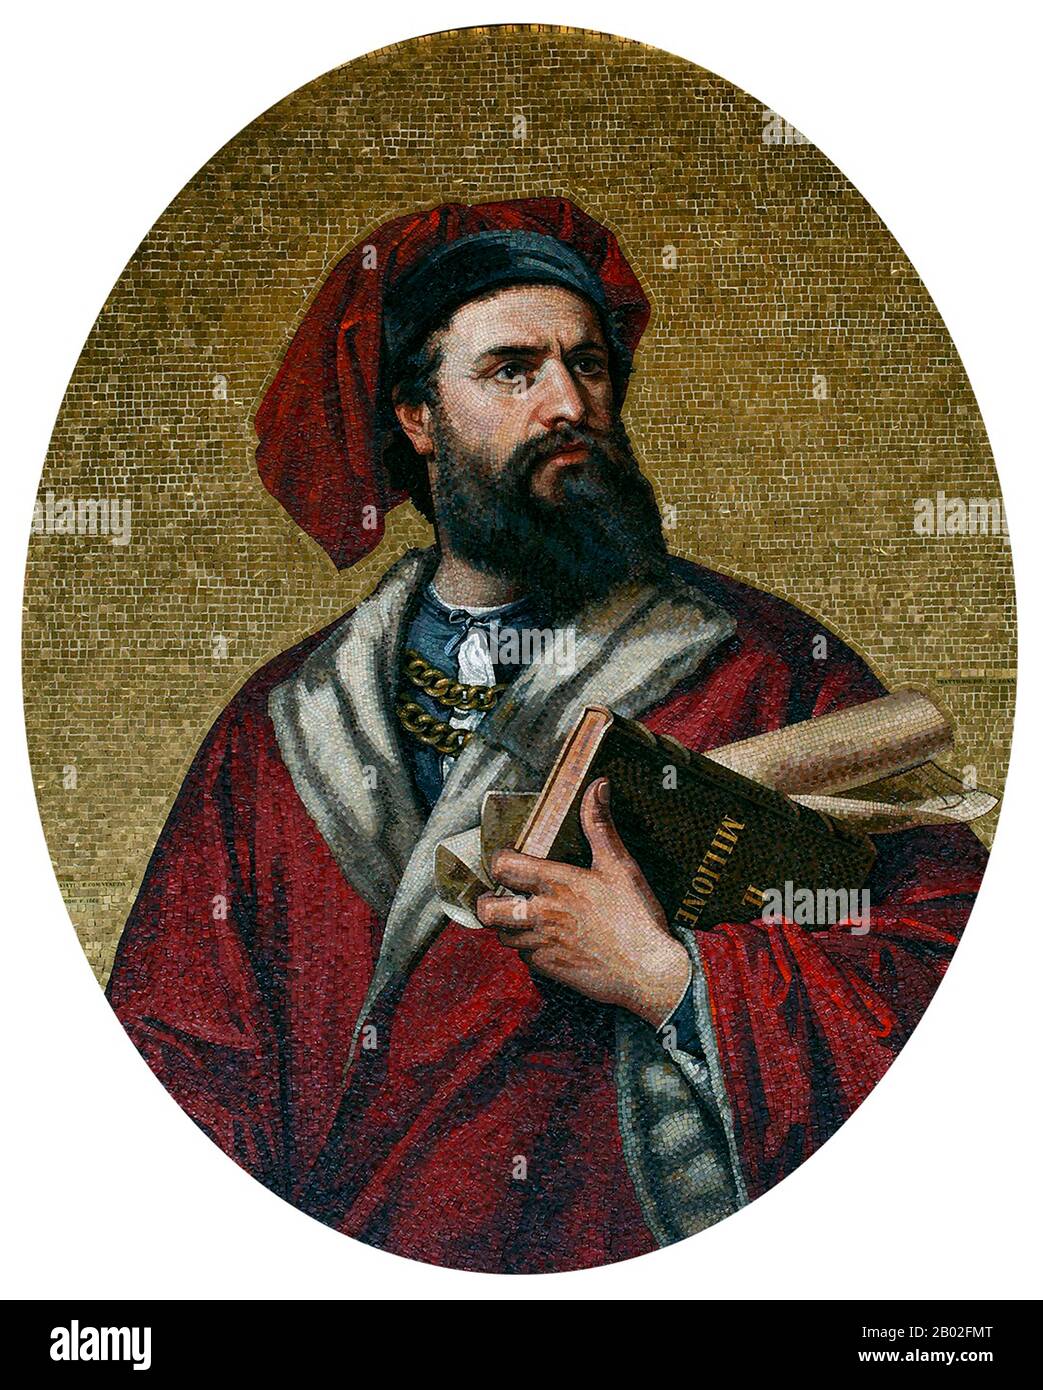 Probably born in Venice around 1254 CE, Marco Polo was raised by his aunt and uncle after his mother died. His father, Niccolo, was a Venetian merchant who left before Marco was born to trade in the Middle East. Niccolo and his brother Maffeo passed through much of Asia and met with Mongol emperor Kublai Khan who reportedly invited them to be ambassadors. In 1269, Niccolo and Maffeo returned to Venice, meeting Marco for the first time.  In 1271, Marco Polo, aged 17, with his father and his uncle, set off for Asia, travelling through Constantinople, Baghdad, Persia, Kashgar, China and Burma. Th Stock Photo